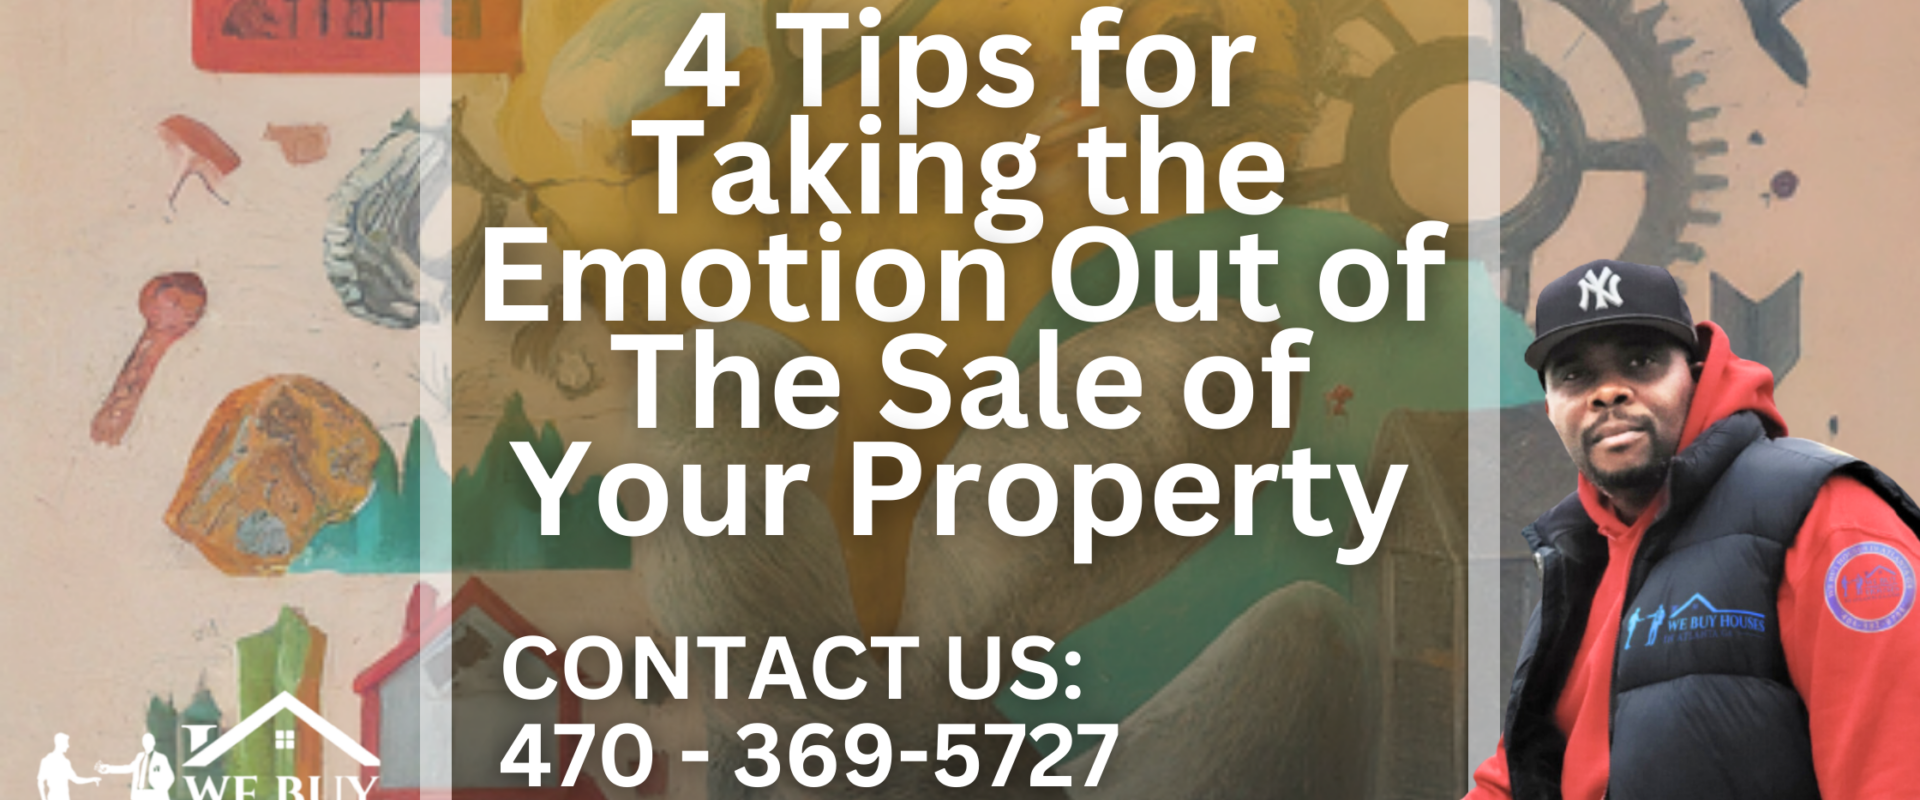 4 Tips for Taking the Emotion Out of The Sale of Your Property